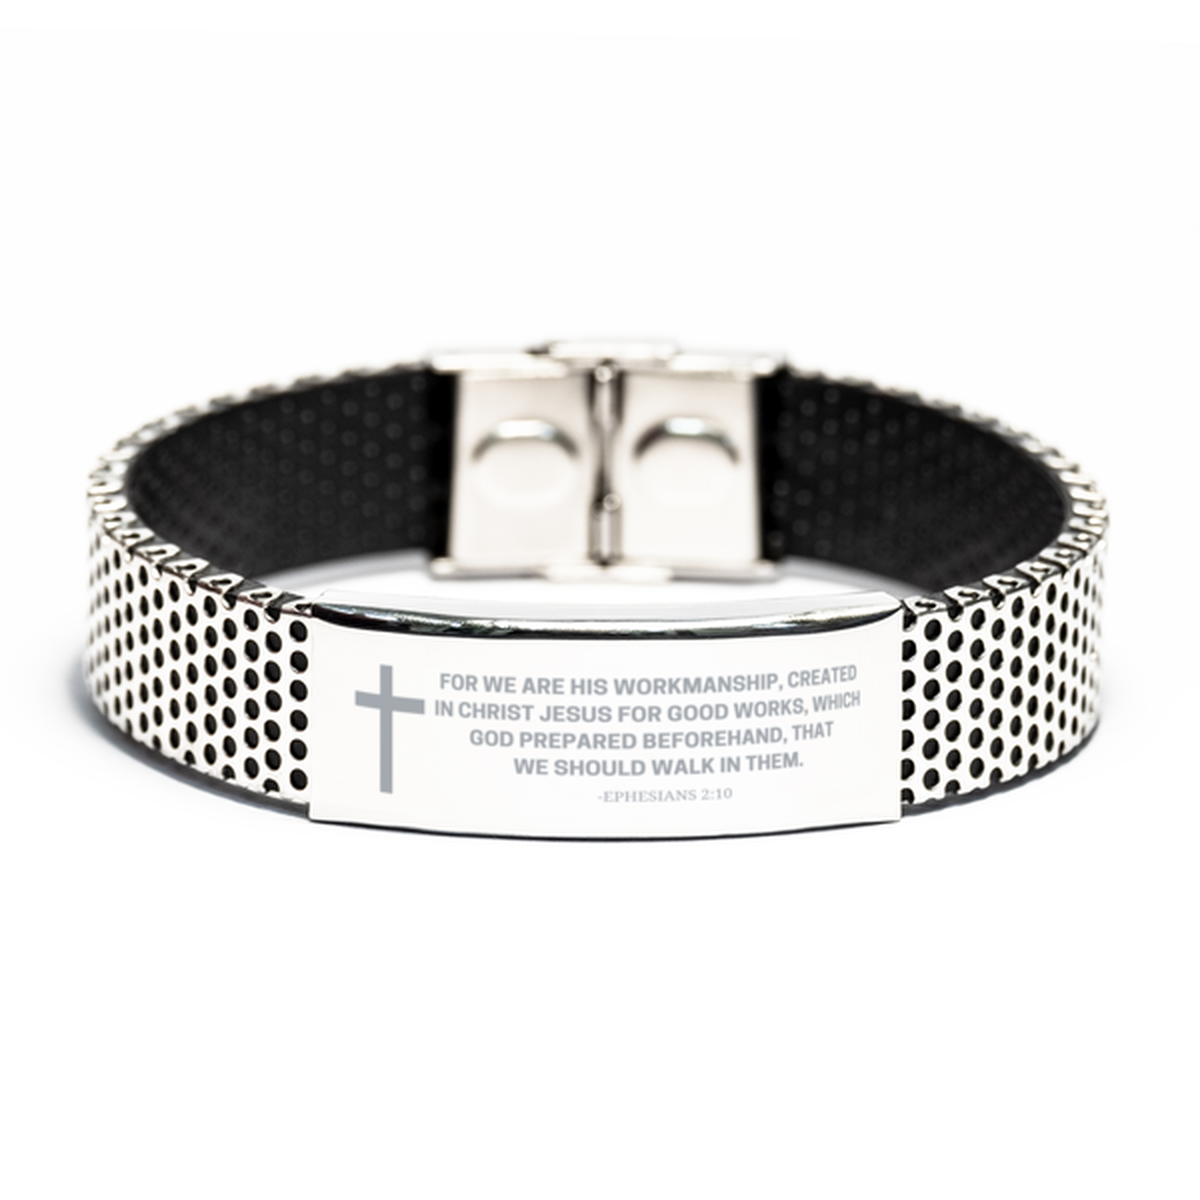 Baptism Gifts For Teenage Boys Girls, Christian Bible Verse Stainless Steel Bracelet, For we are His workmanship, Catholic Confirmation Gifts for Son, Godson, Grandson, Nephew